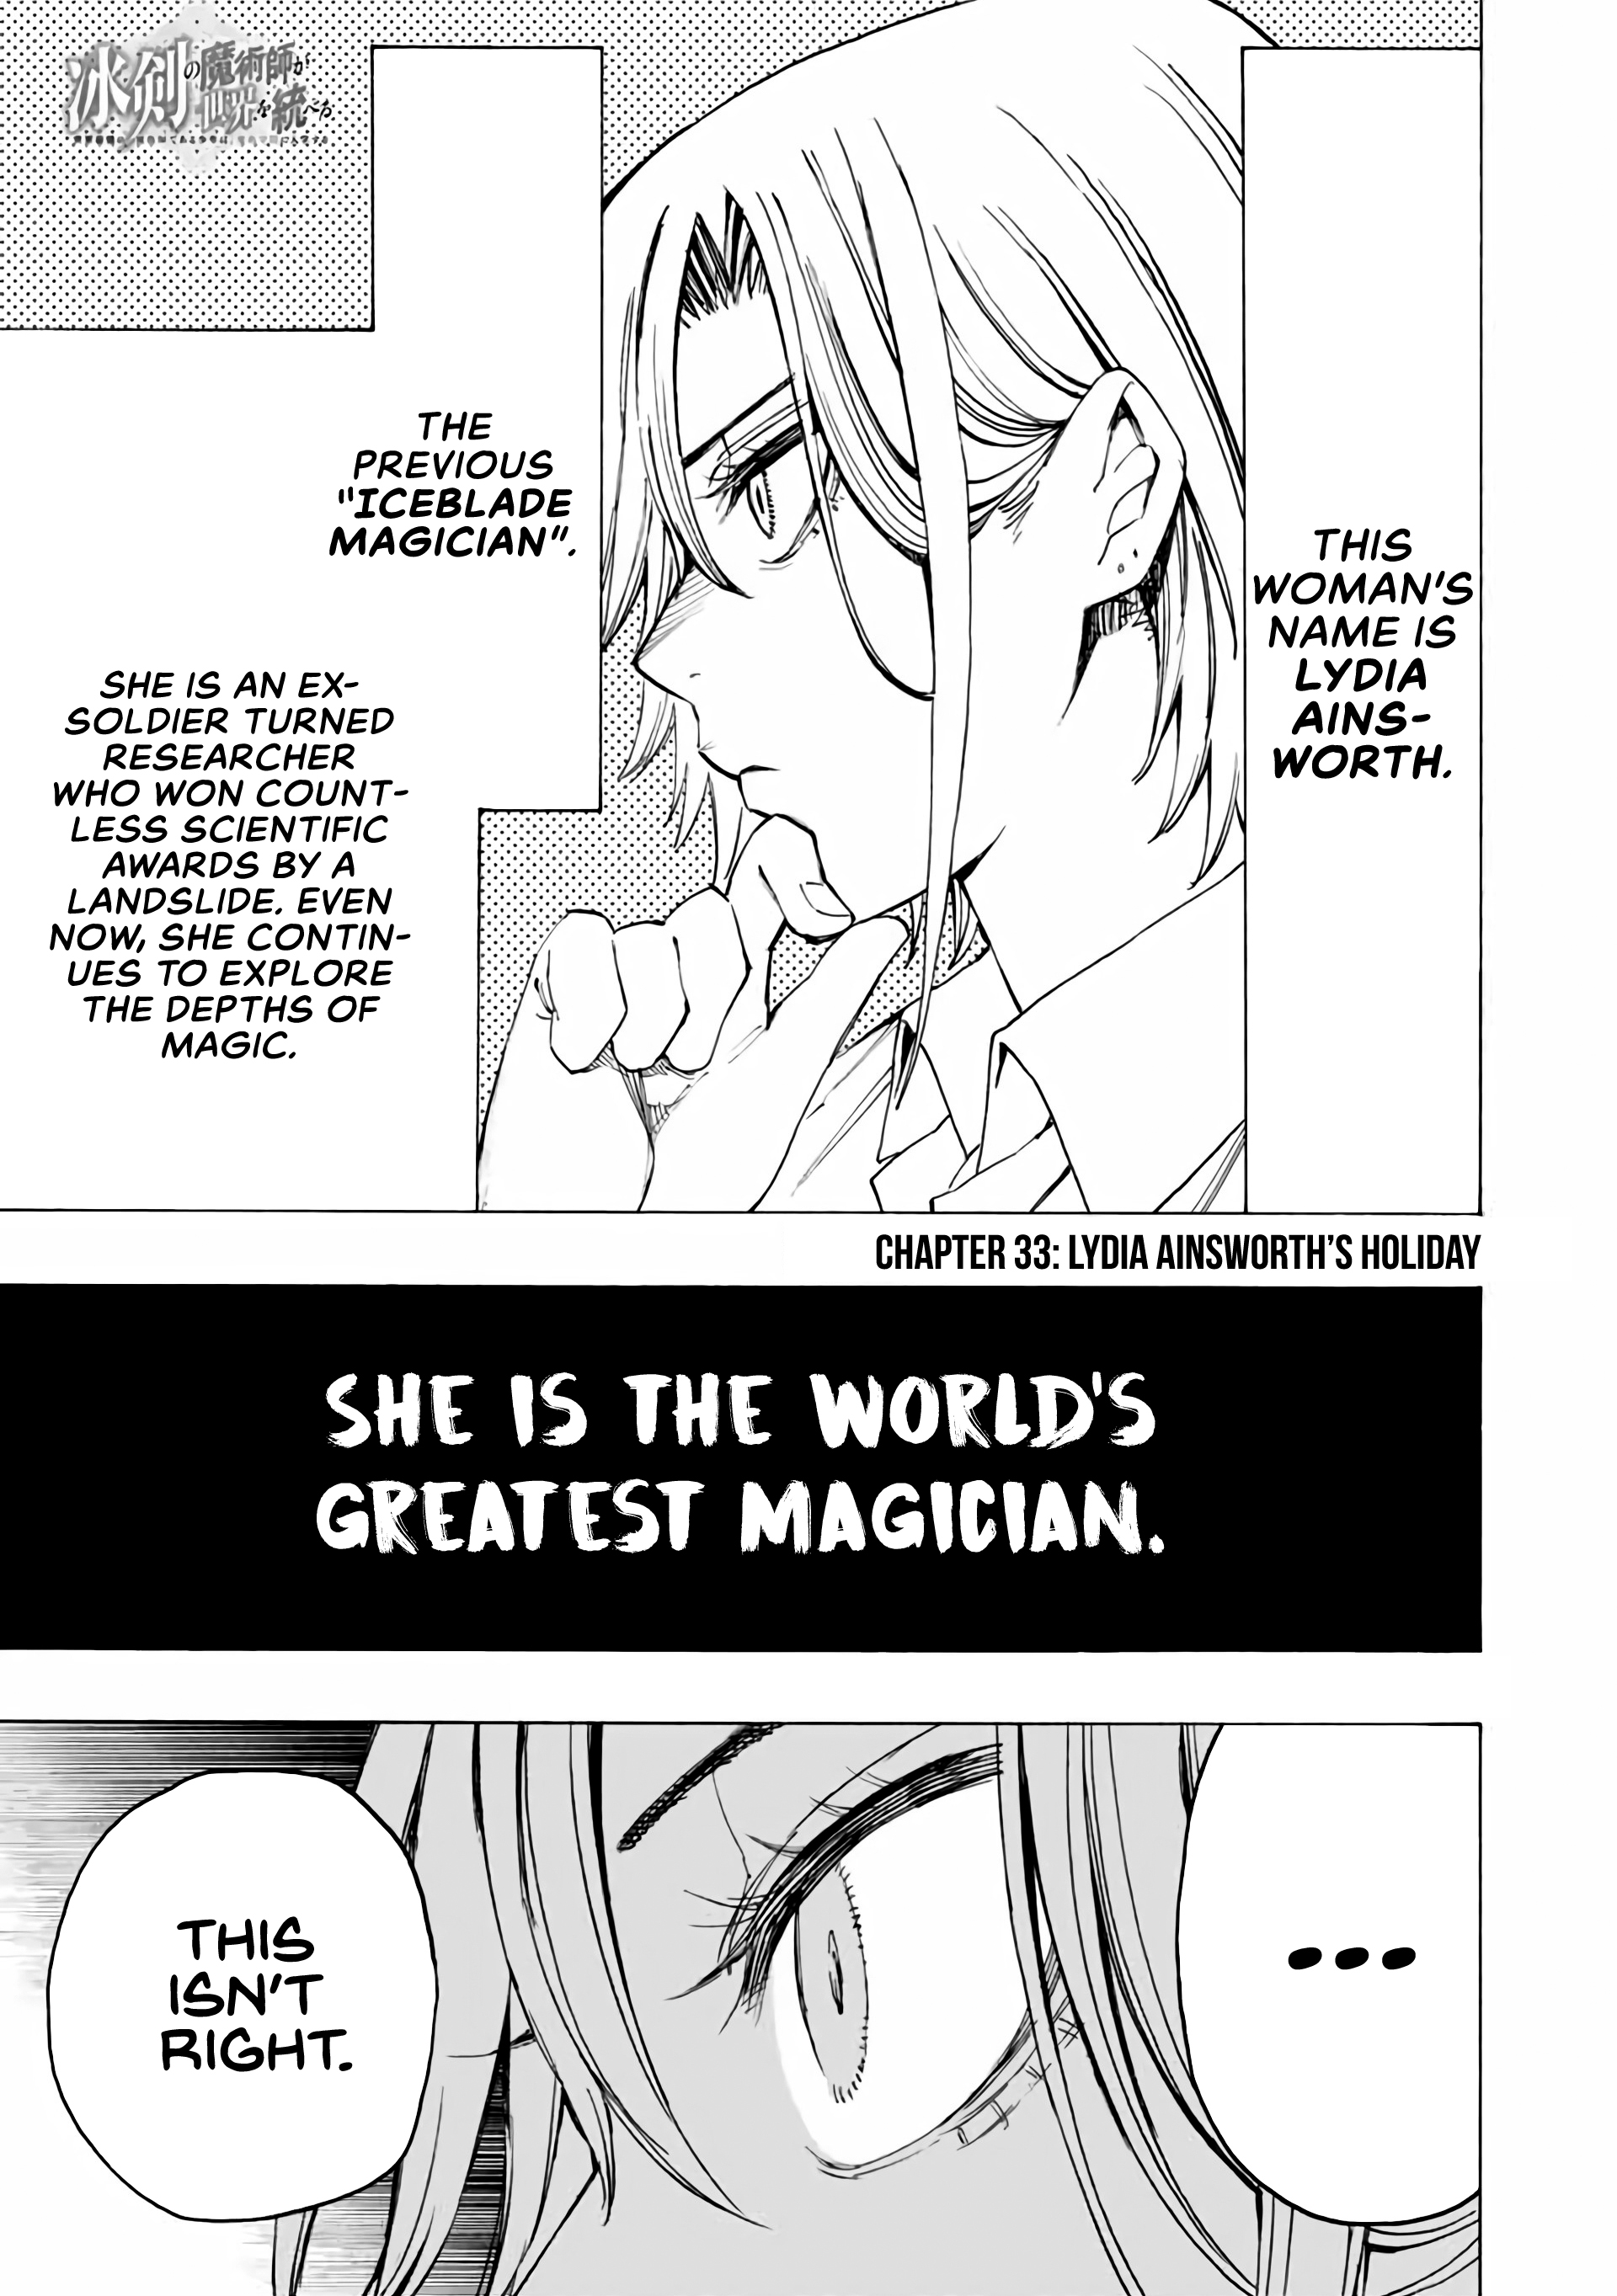 The Iceblade Magician Rules Over The World - Page 2